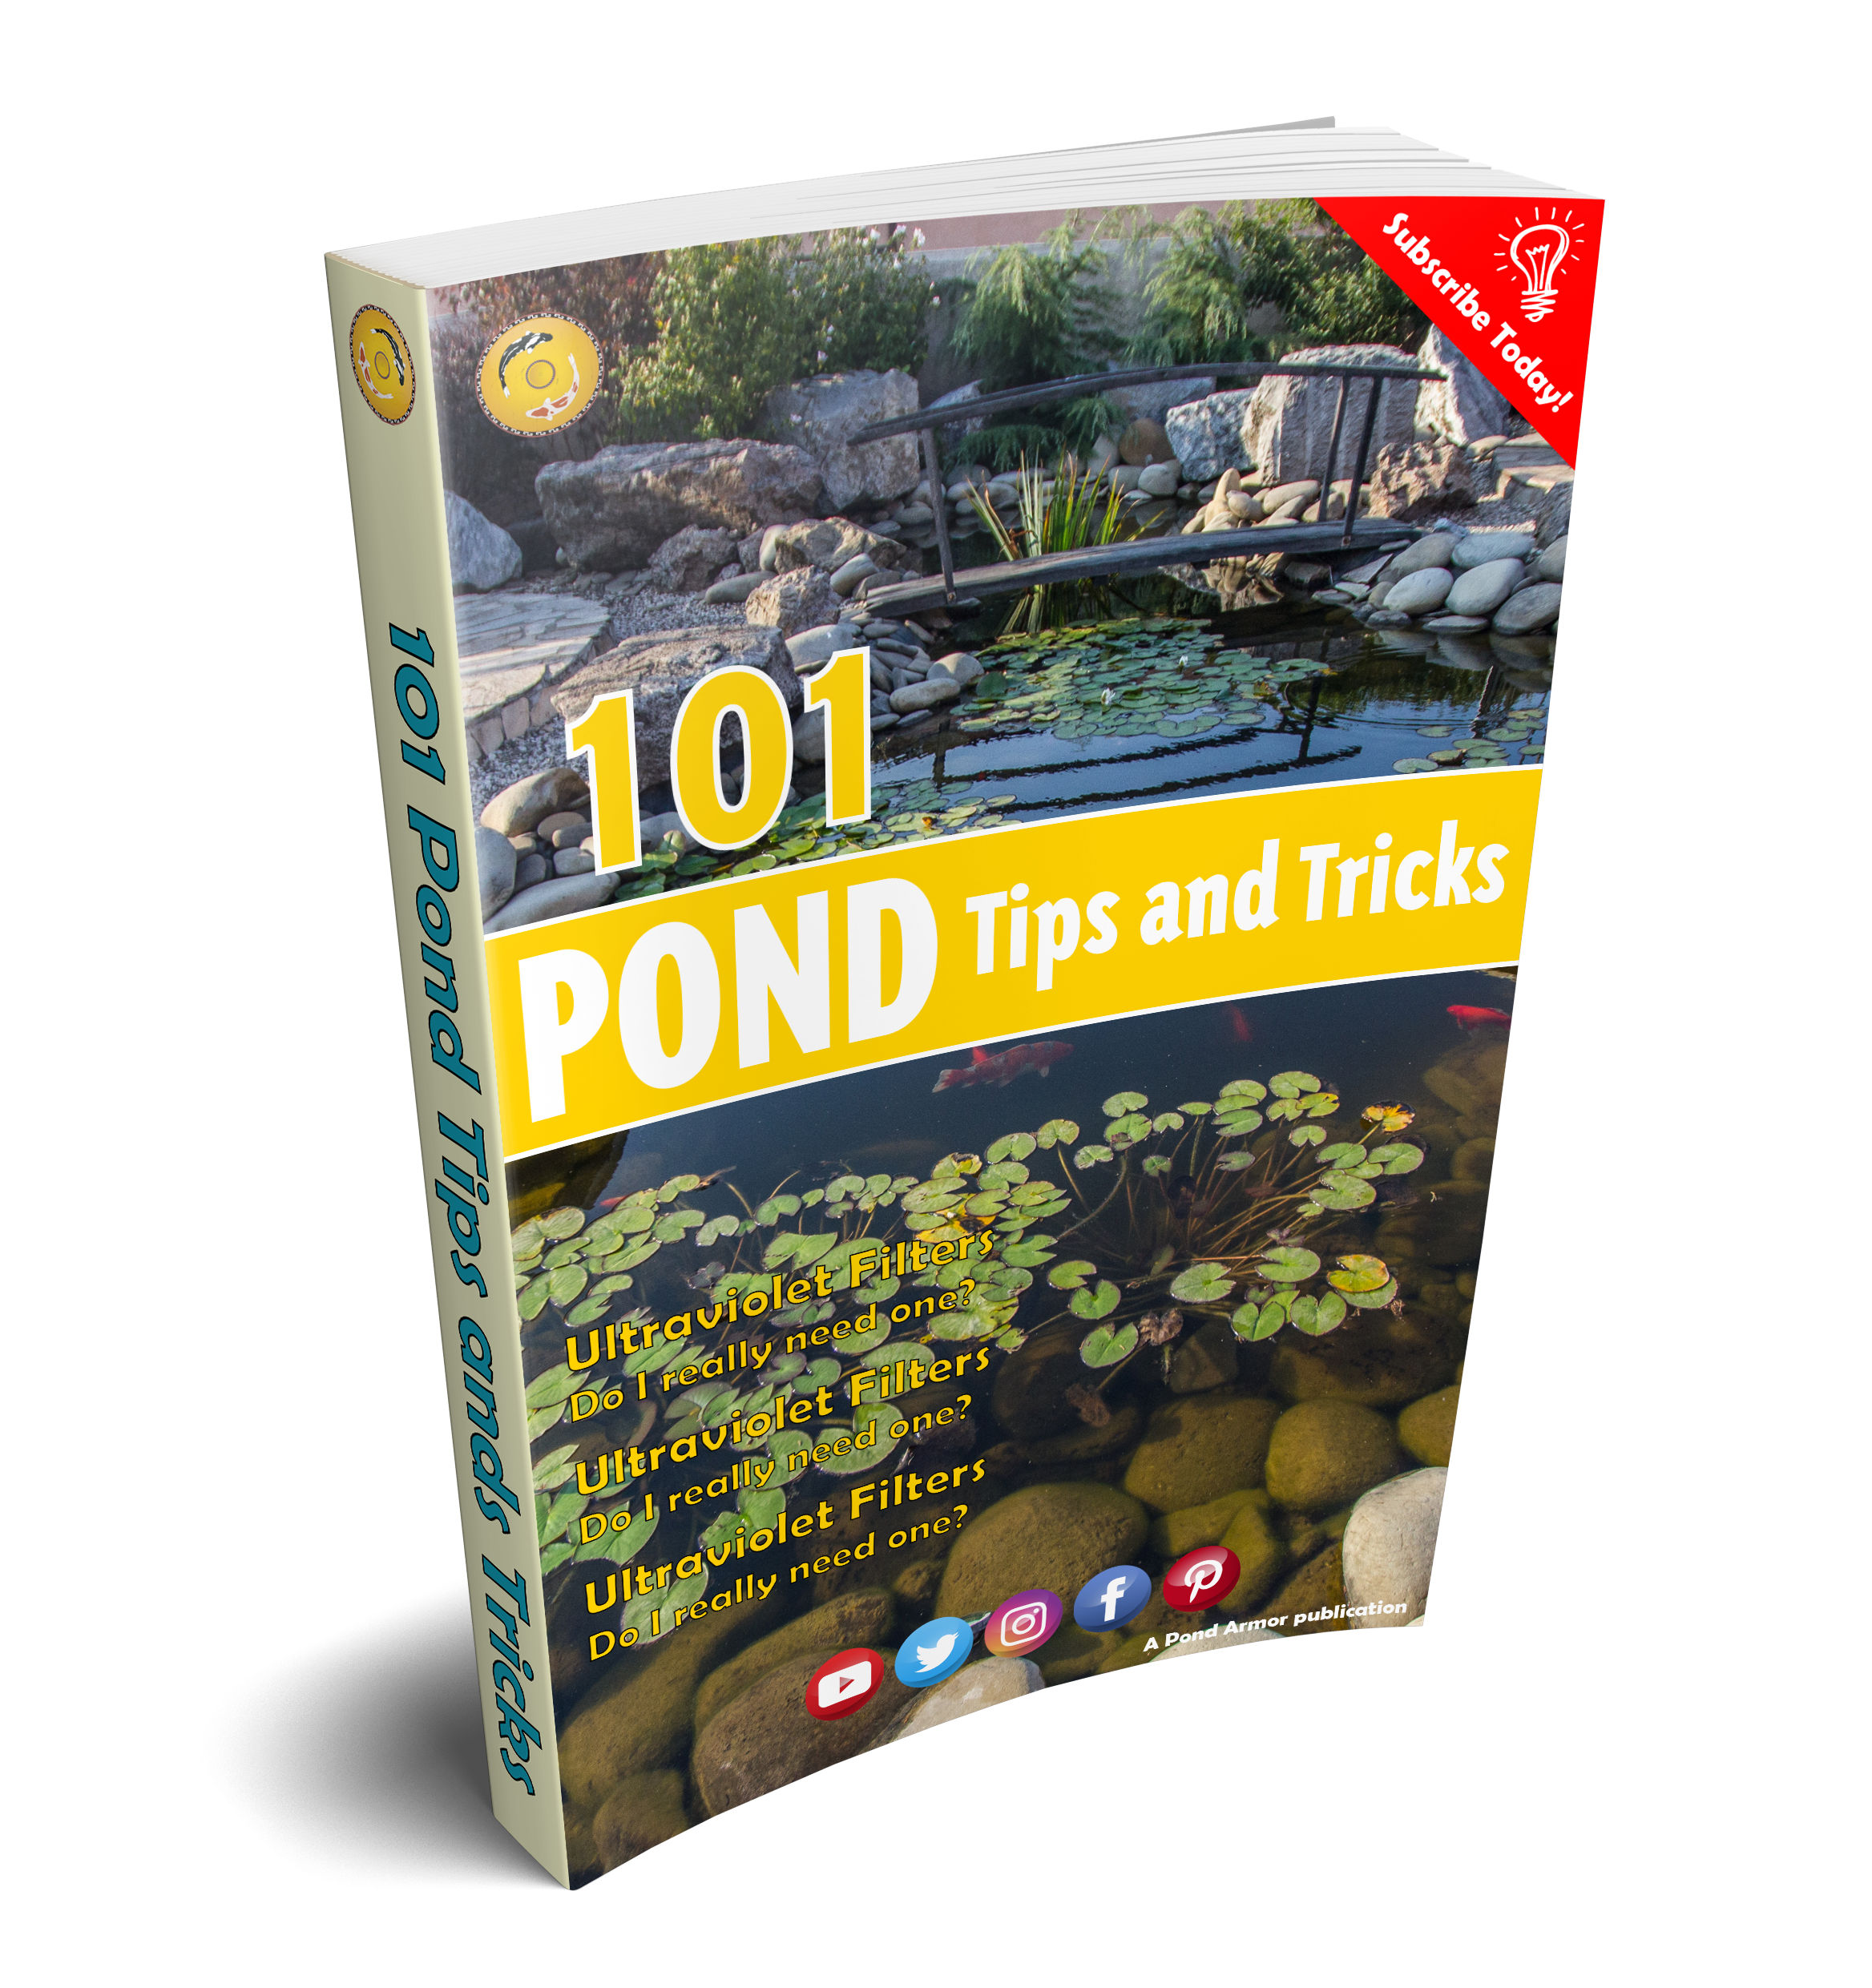 101 Pond Tips and Tricks